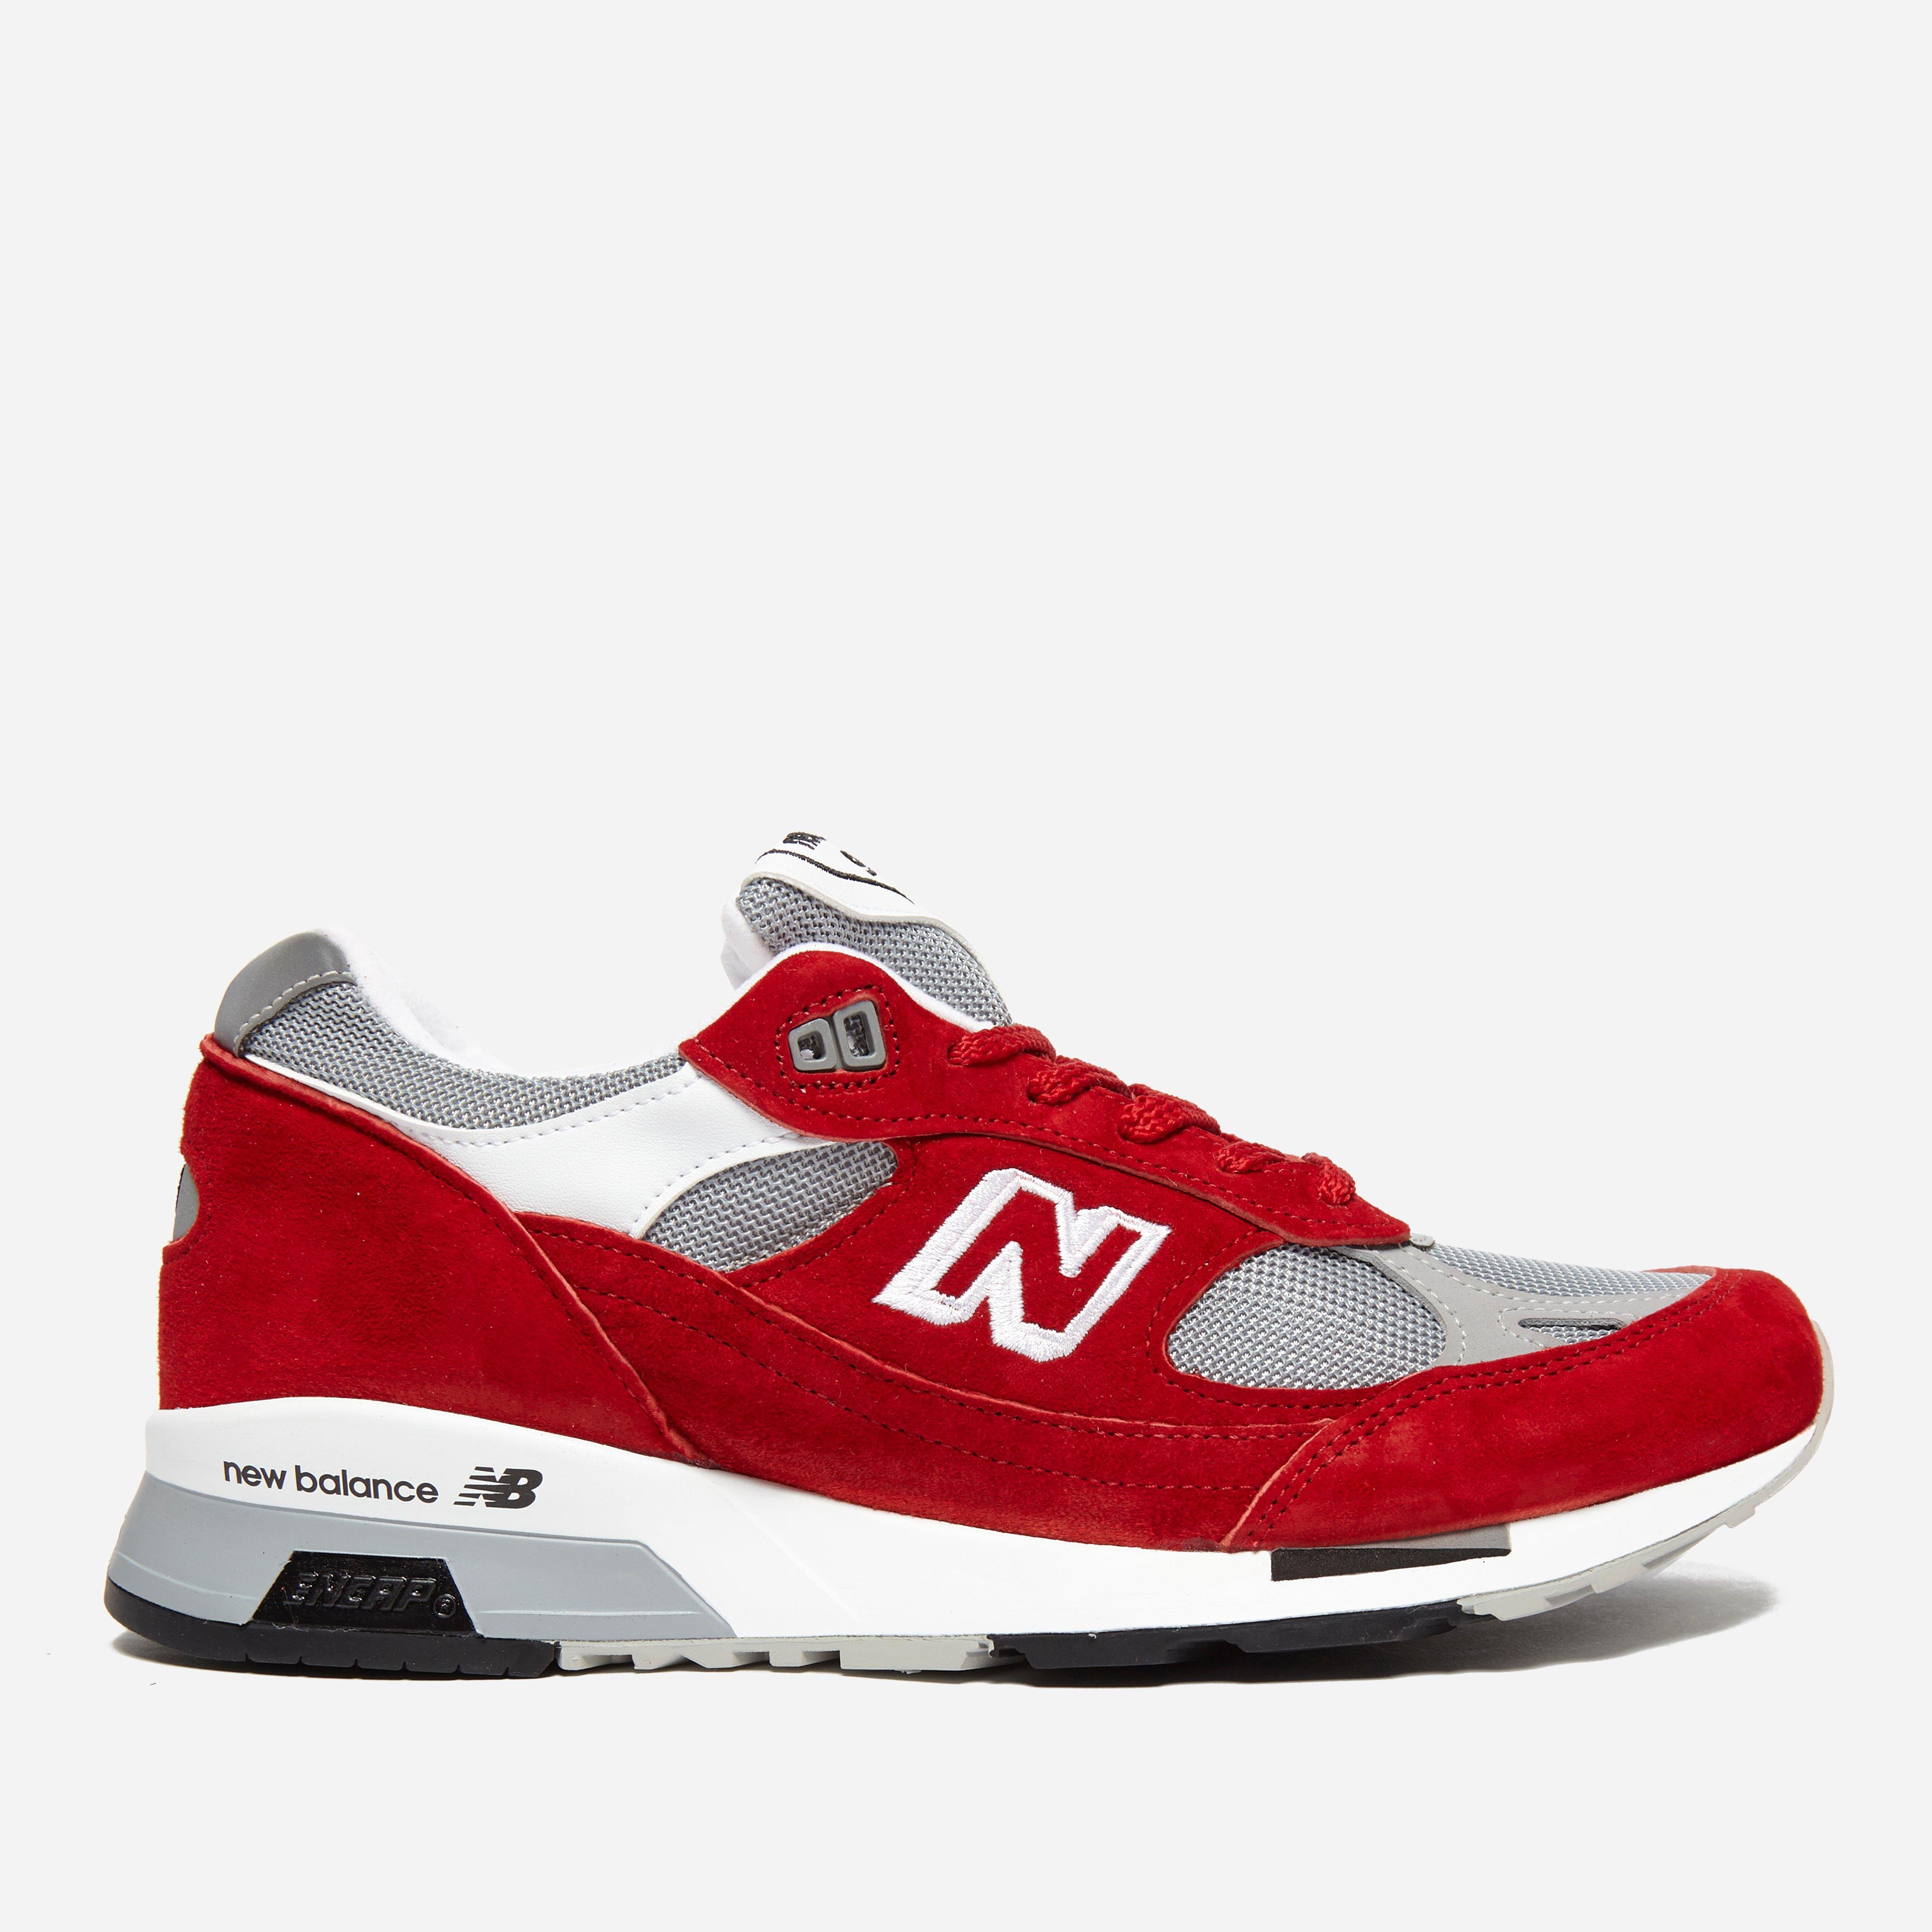 New Balance M 991.5 Aa '991 / 1500' Made In England in Red for Men 